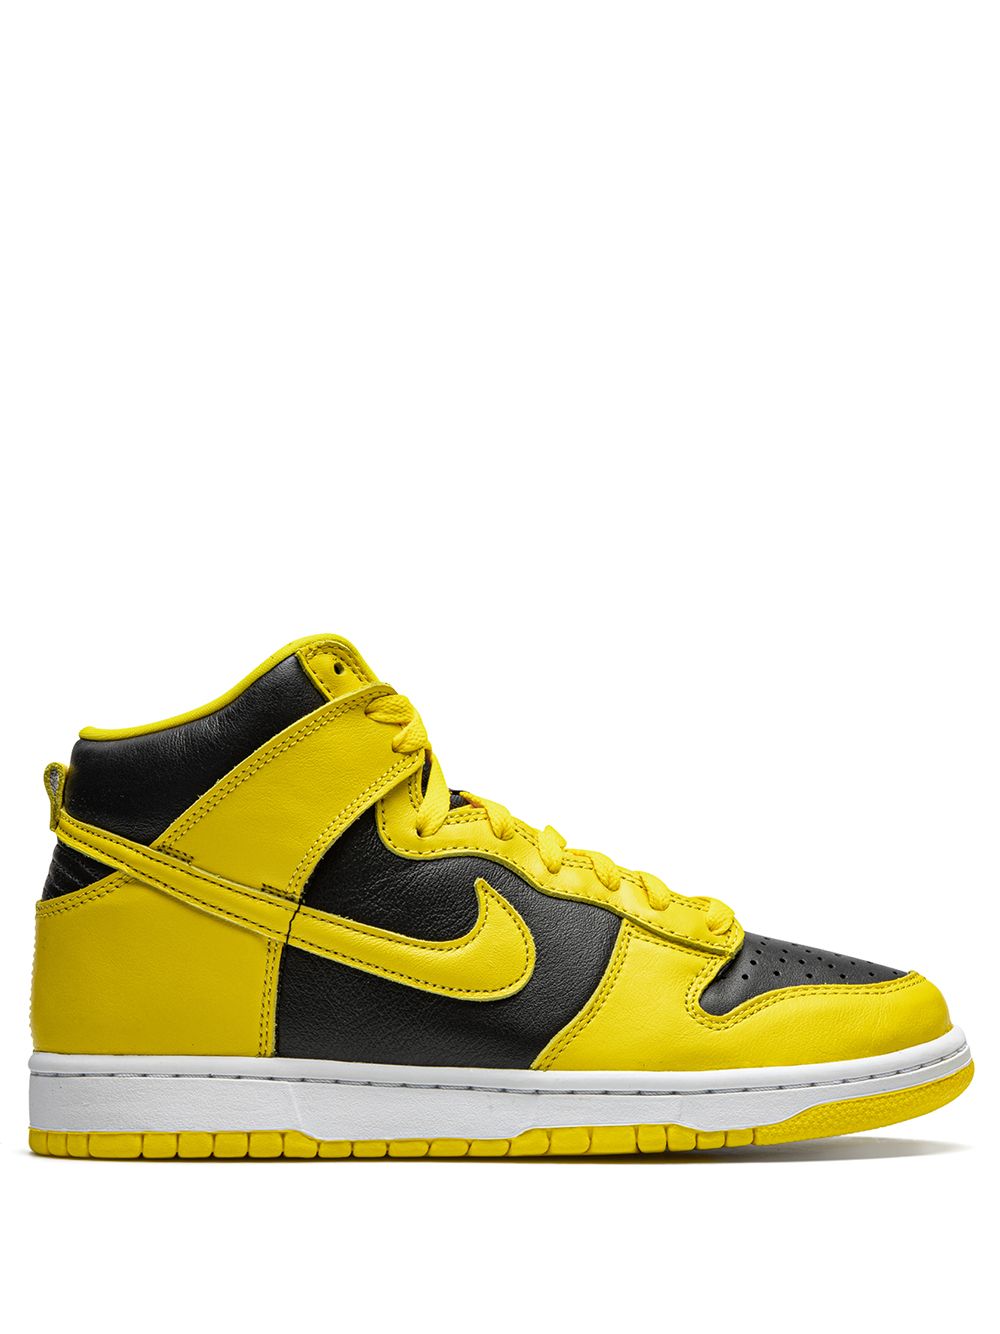 Nike Dunk High SP "Varsity Maize" sneakers - Yellow von Nike